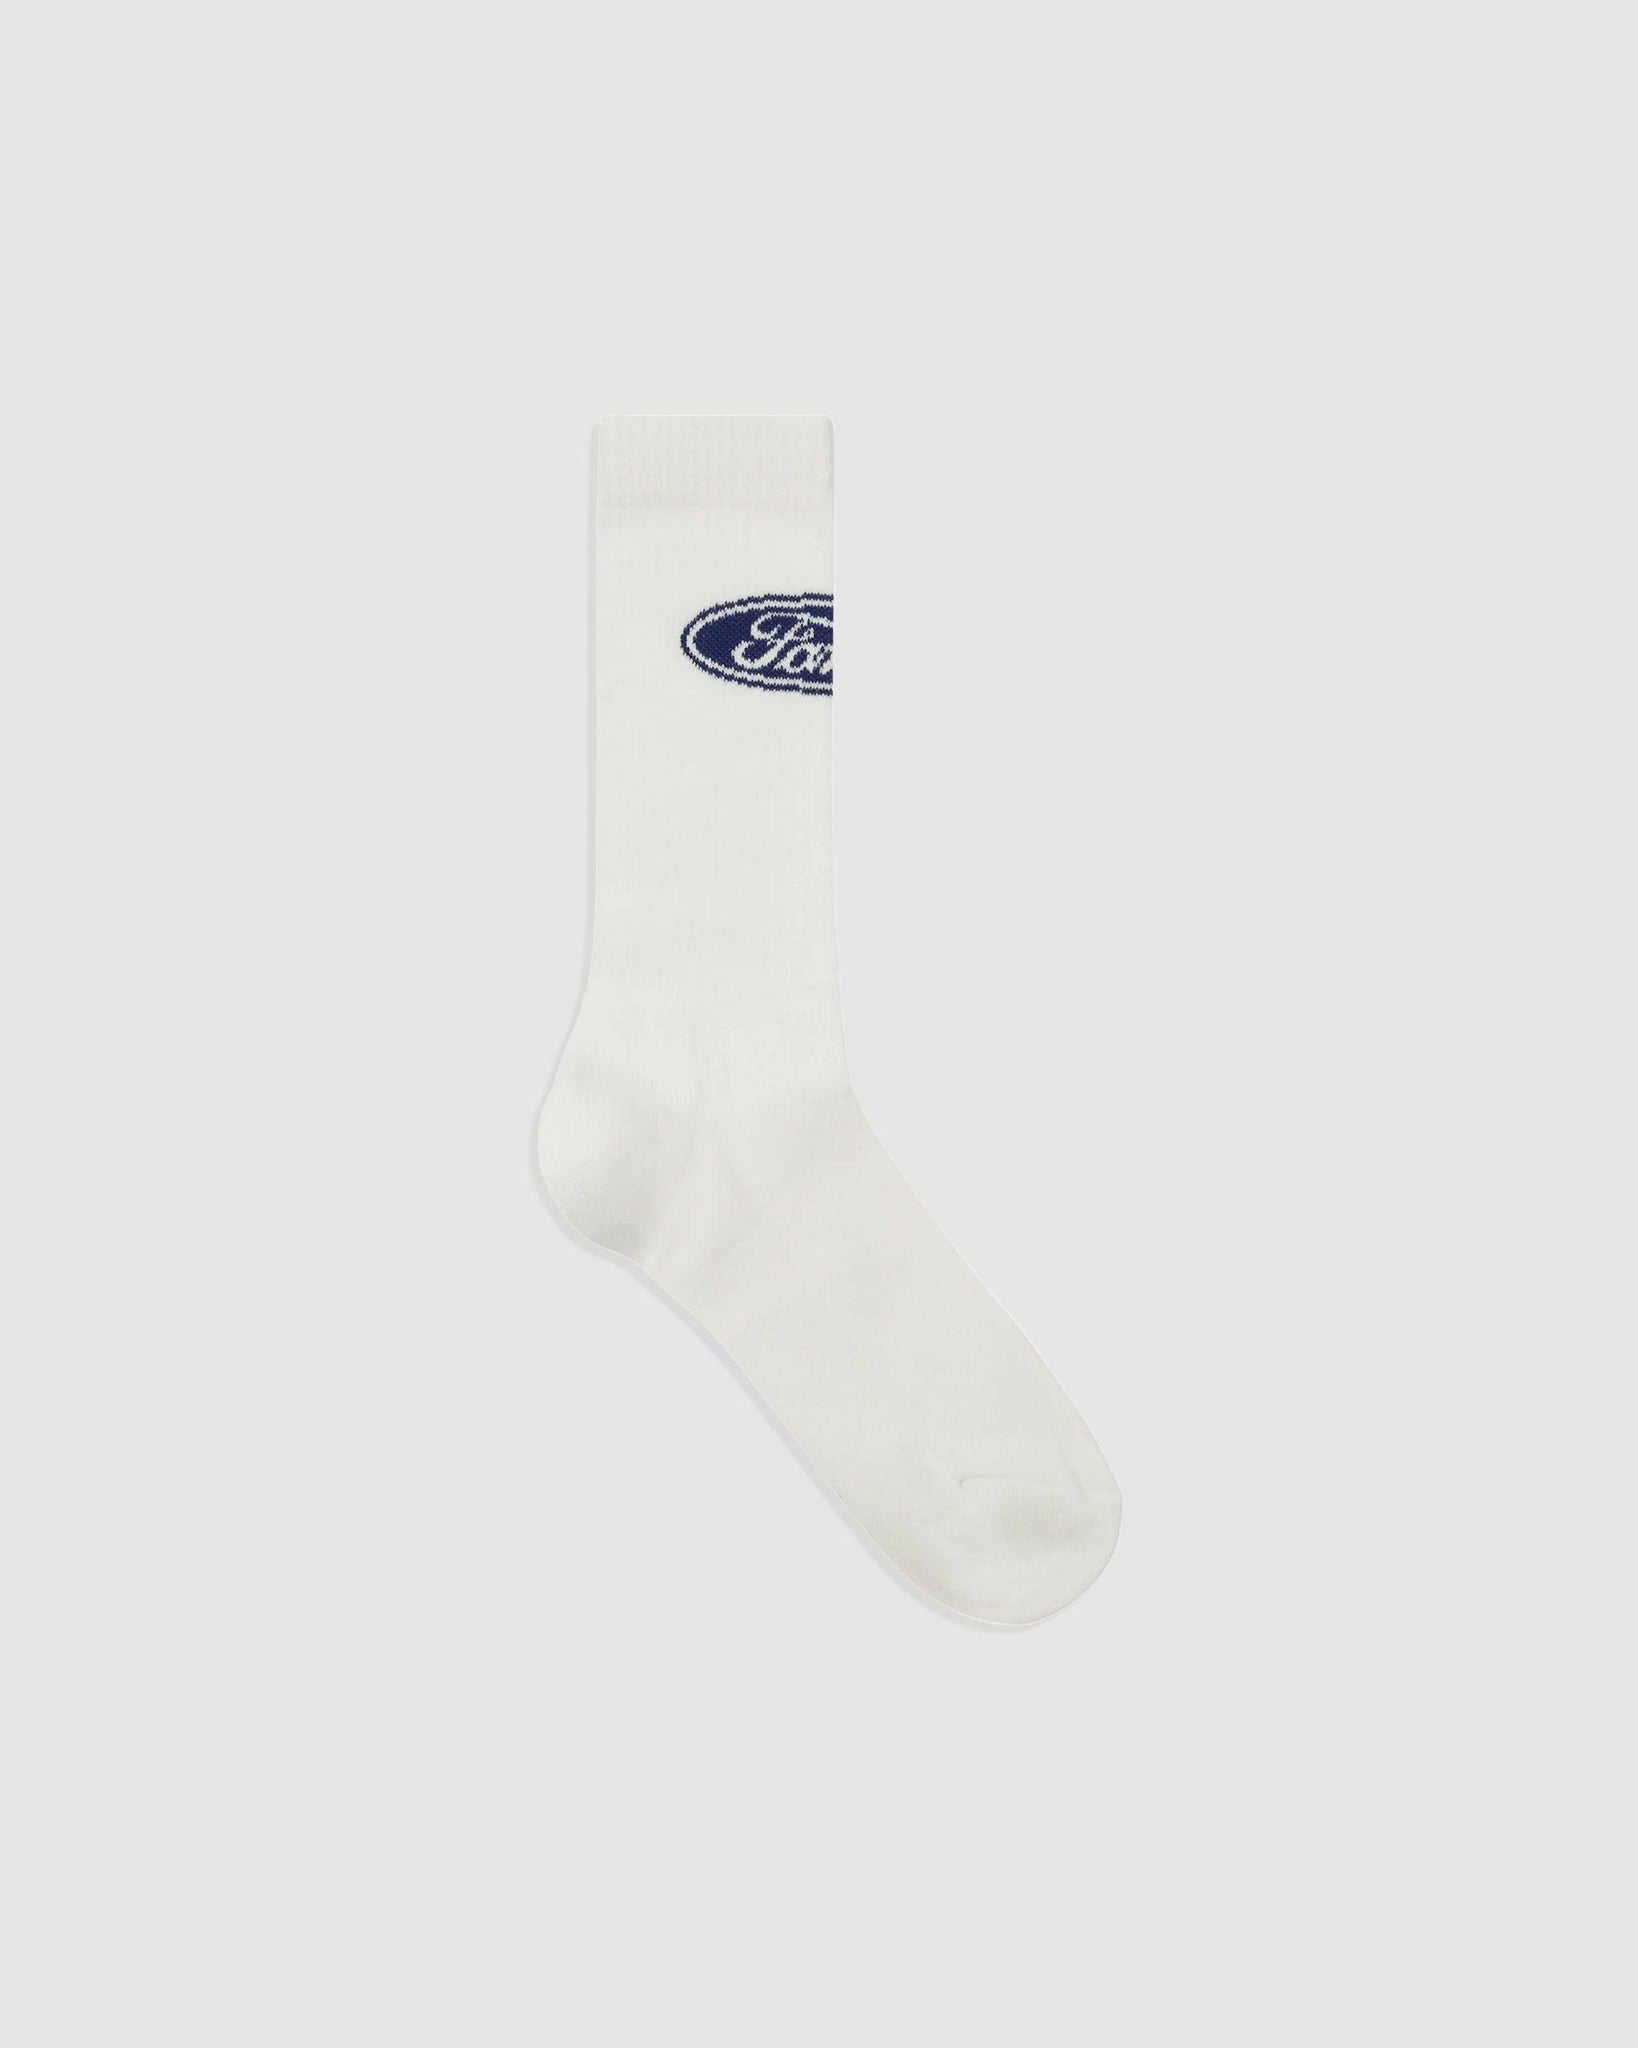 Quil Lemons Farm Socks - {{ collection.title }} - Chinatown Country Club 